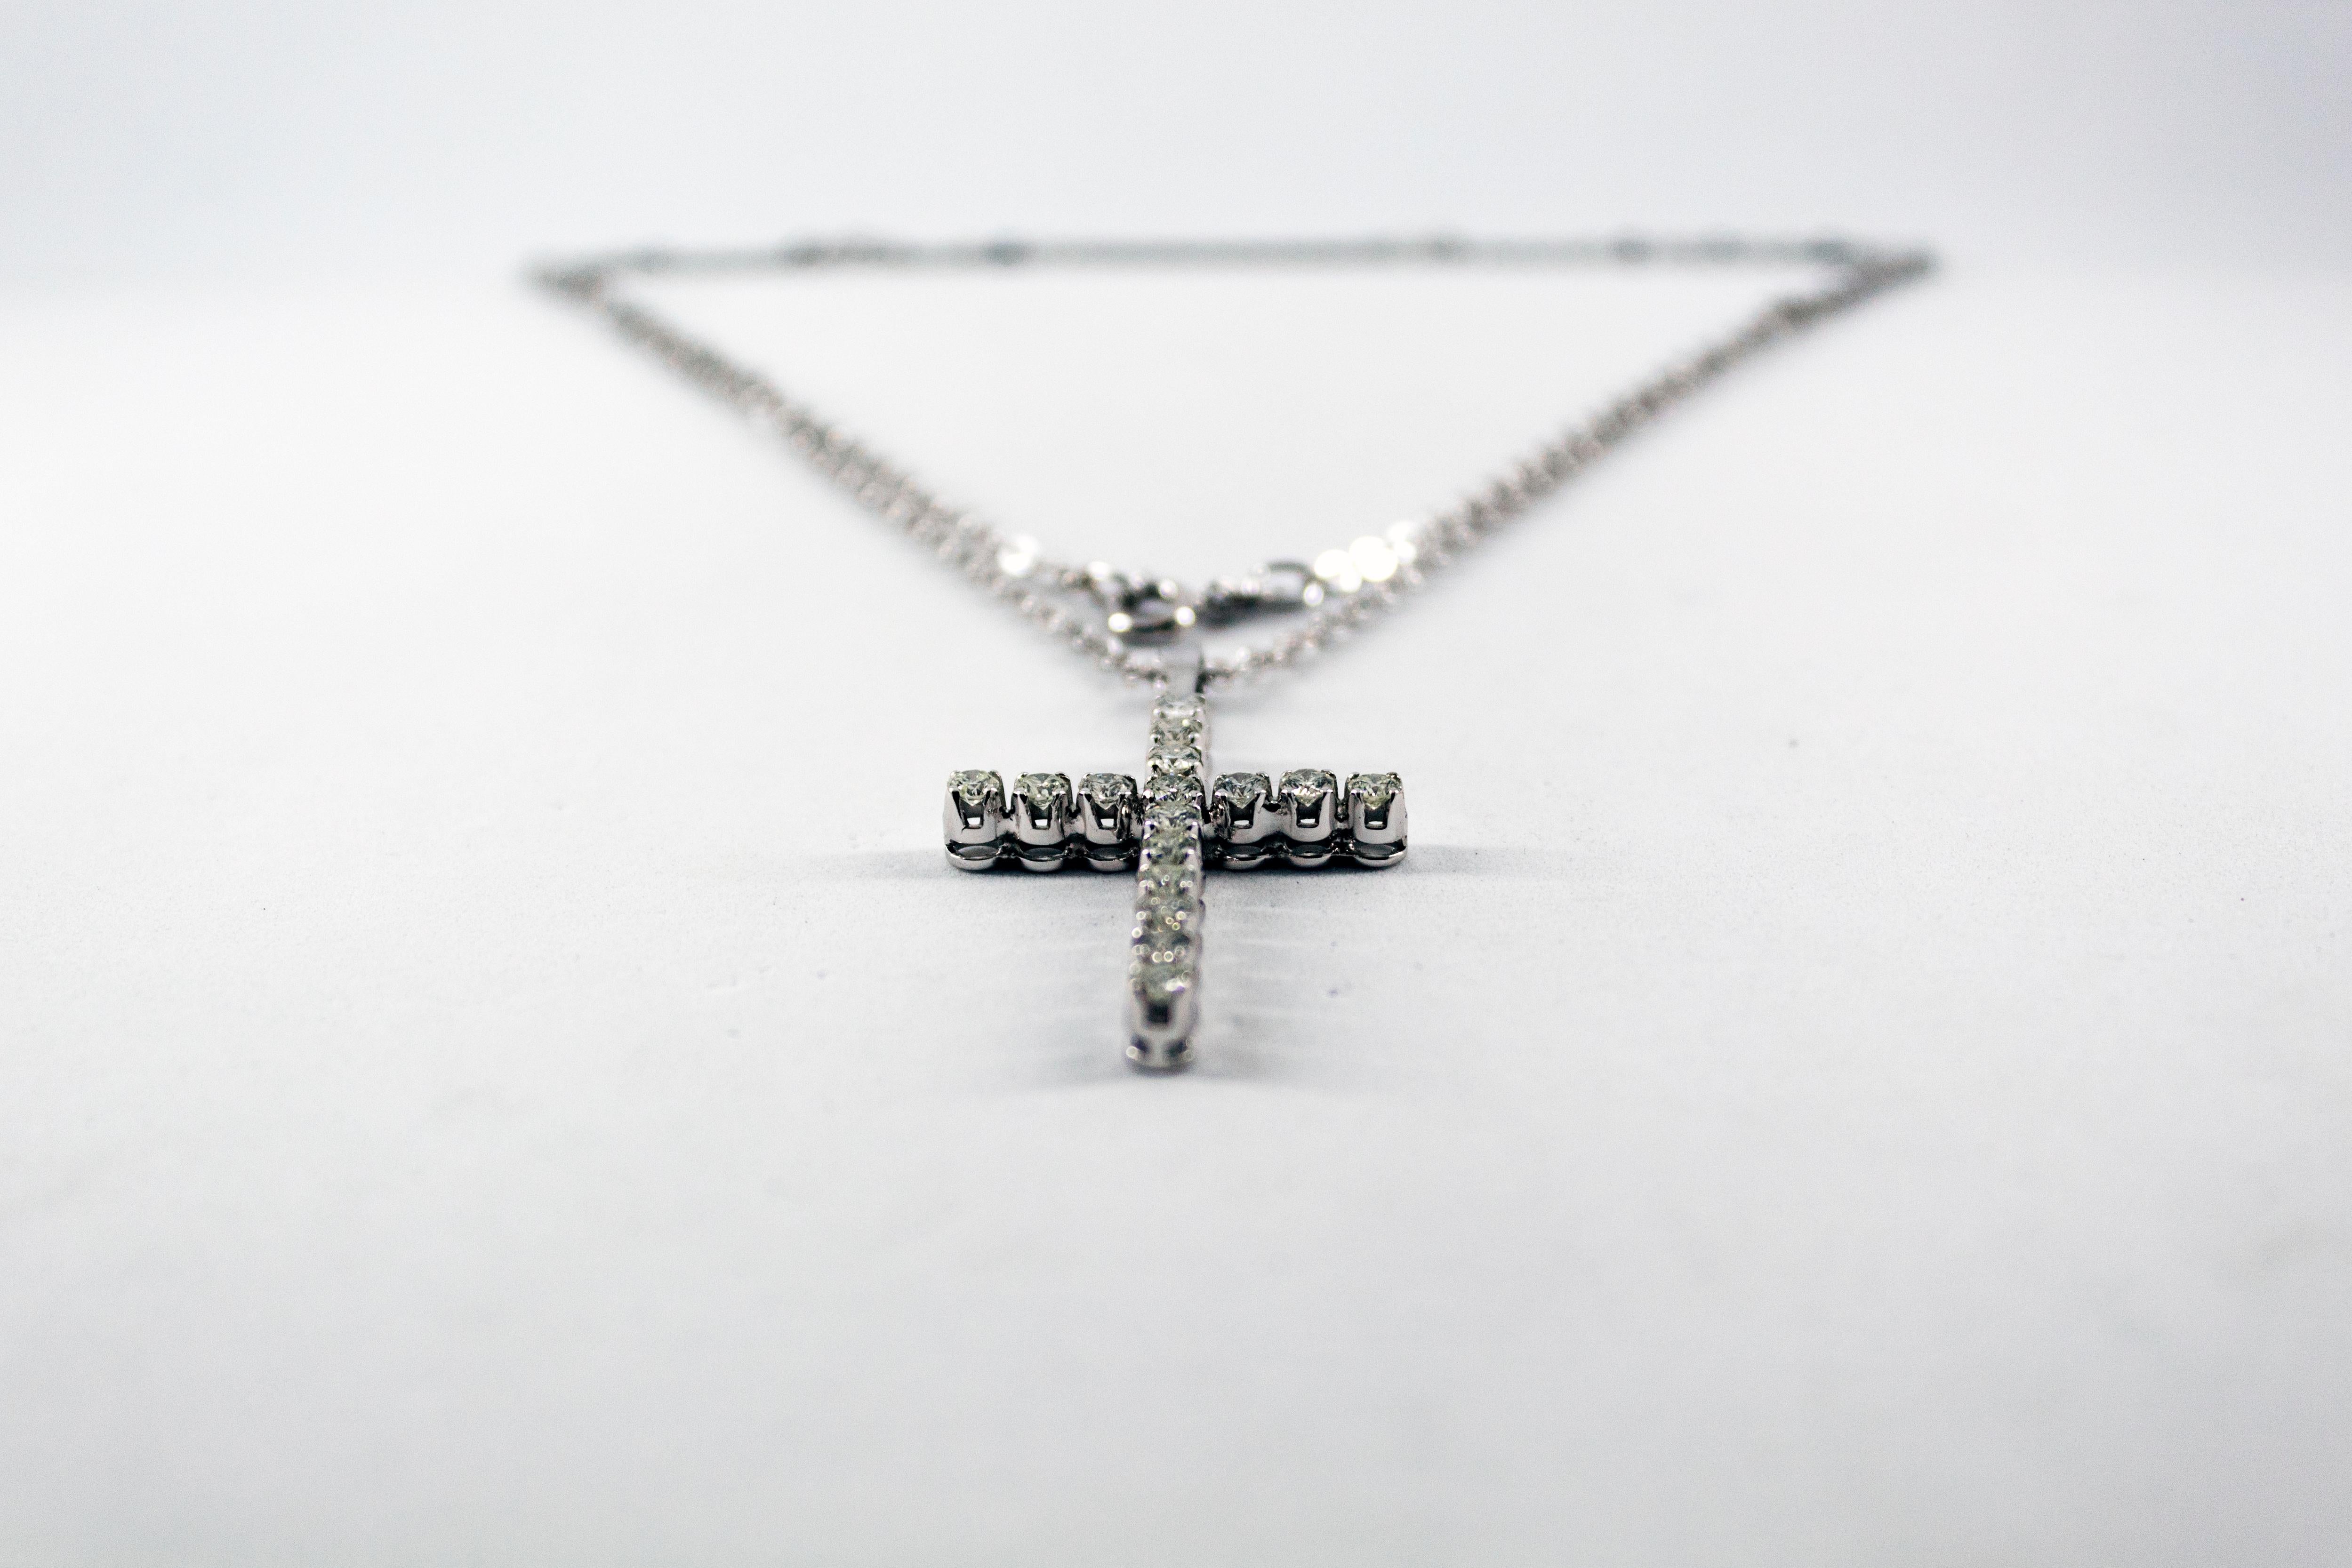 This Necklace is made of 18K White Gold.
This Necklace has 1.12 Carats of White Diamonds.
The Necklace length is 60cm.
We're a workshop so every piece is handmade, customizable and resizable.